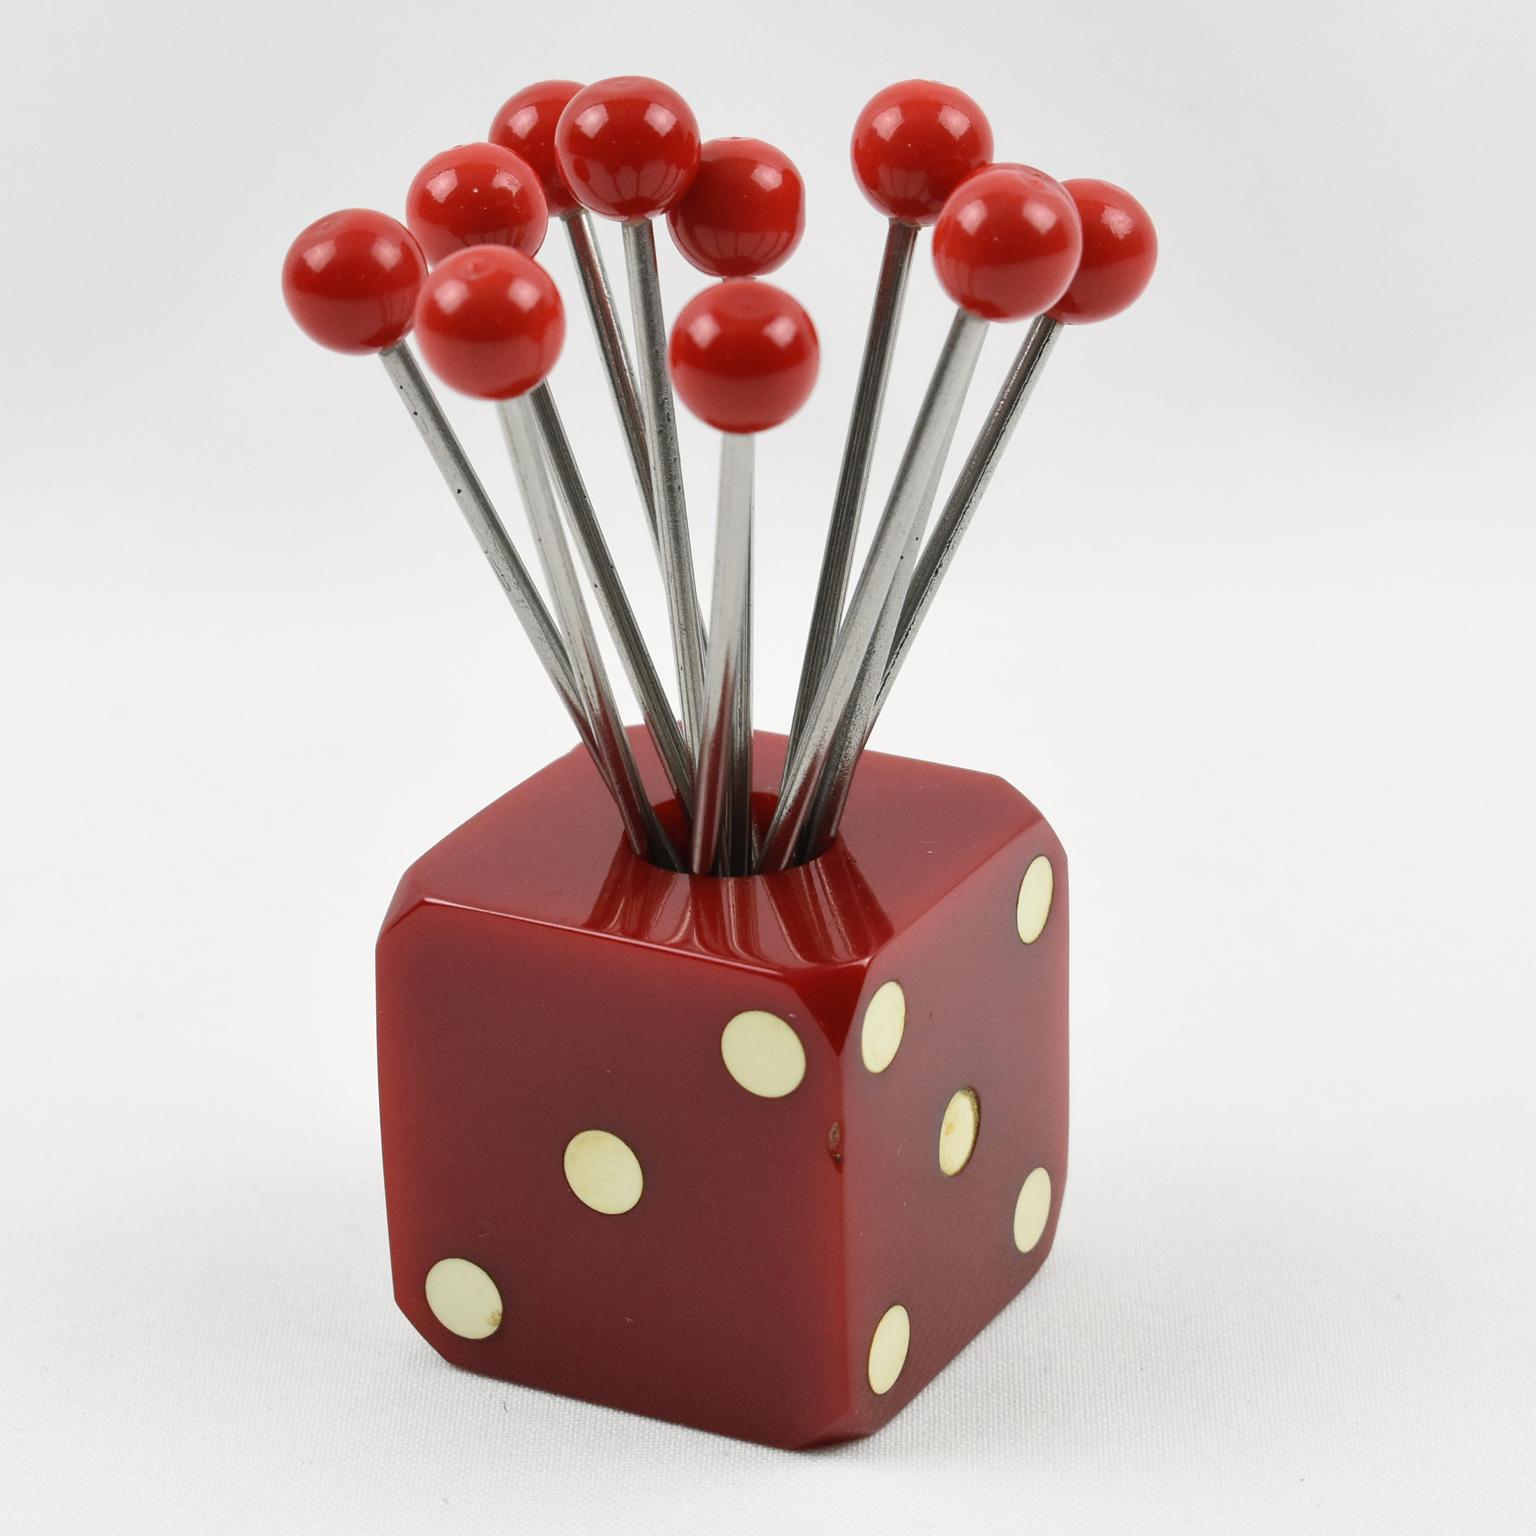 Great looking set of cocktail picks with dice design. Eleven forks with red carved hard plastic bead finial can be removed from central holder and be used as cocktail picks for Manhattan's, Martini's or any other cocktail that requires a garnish.